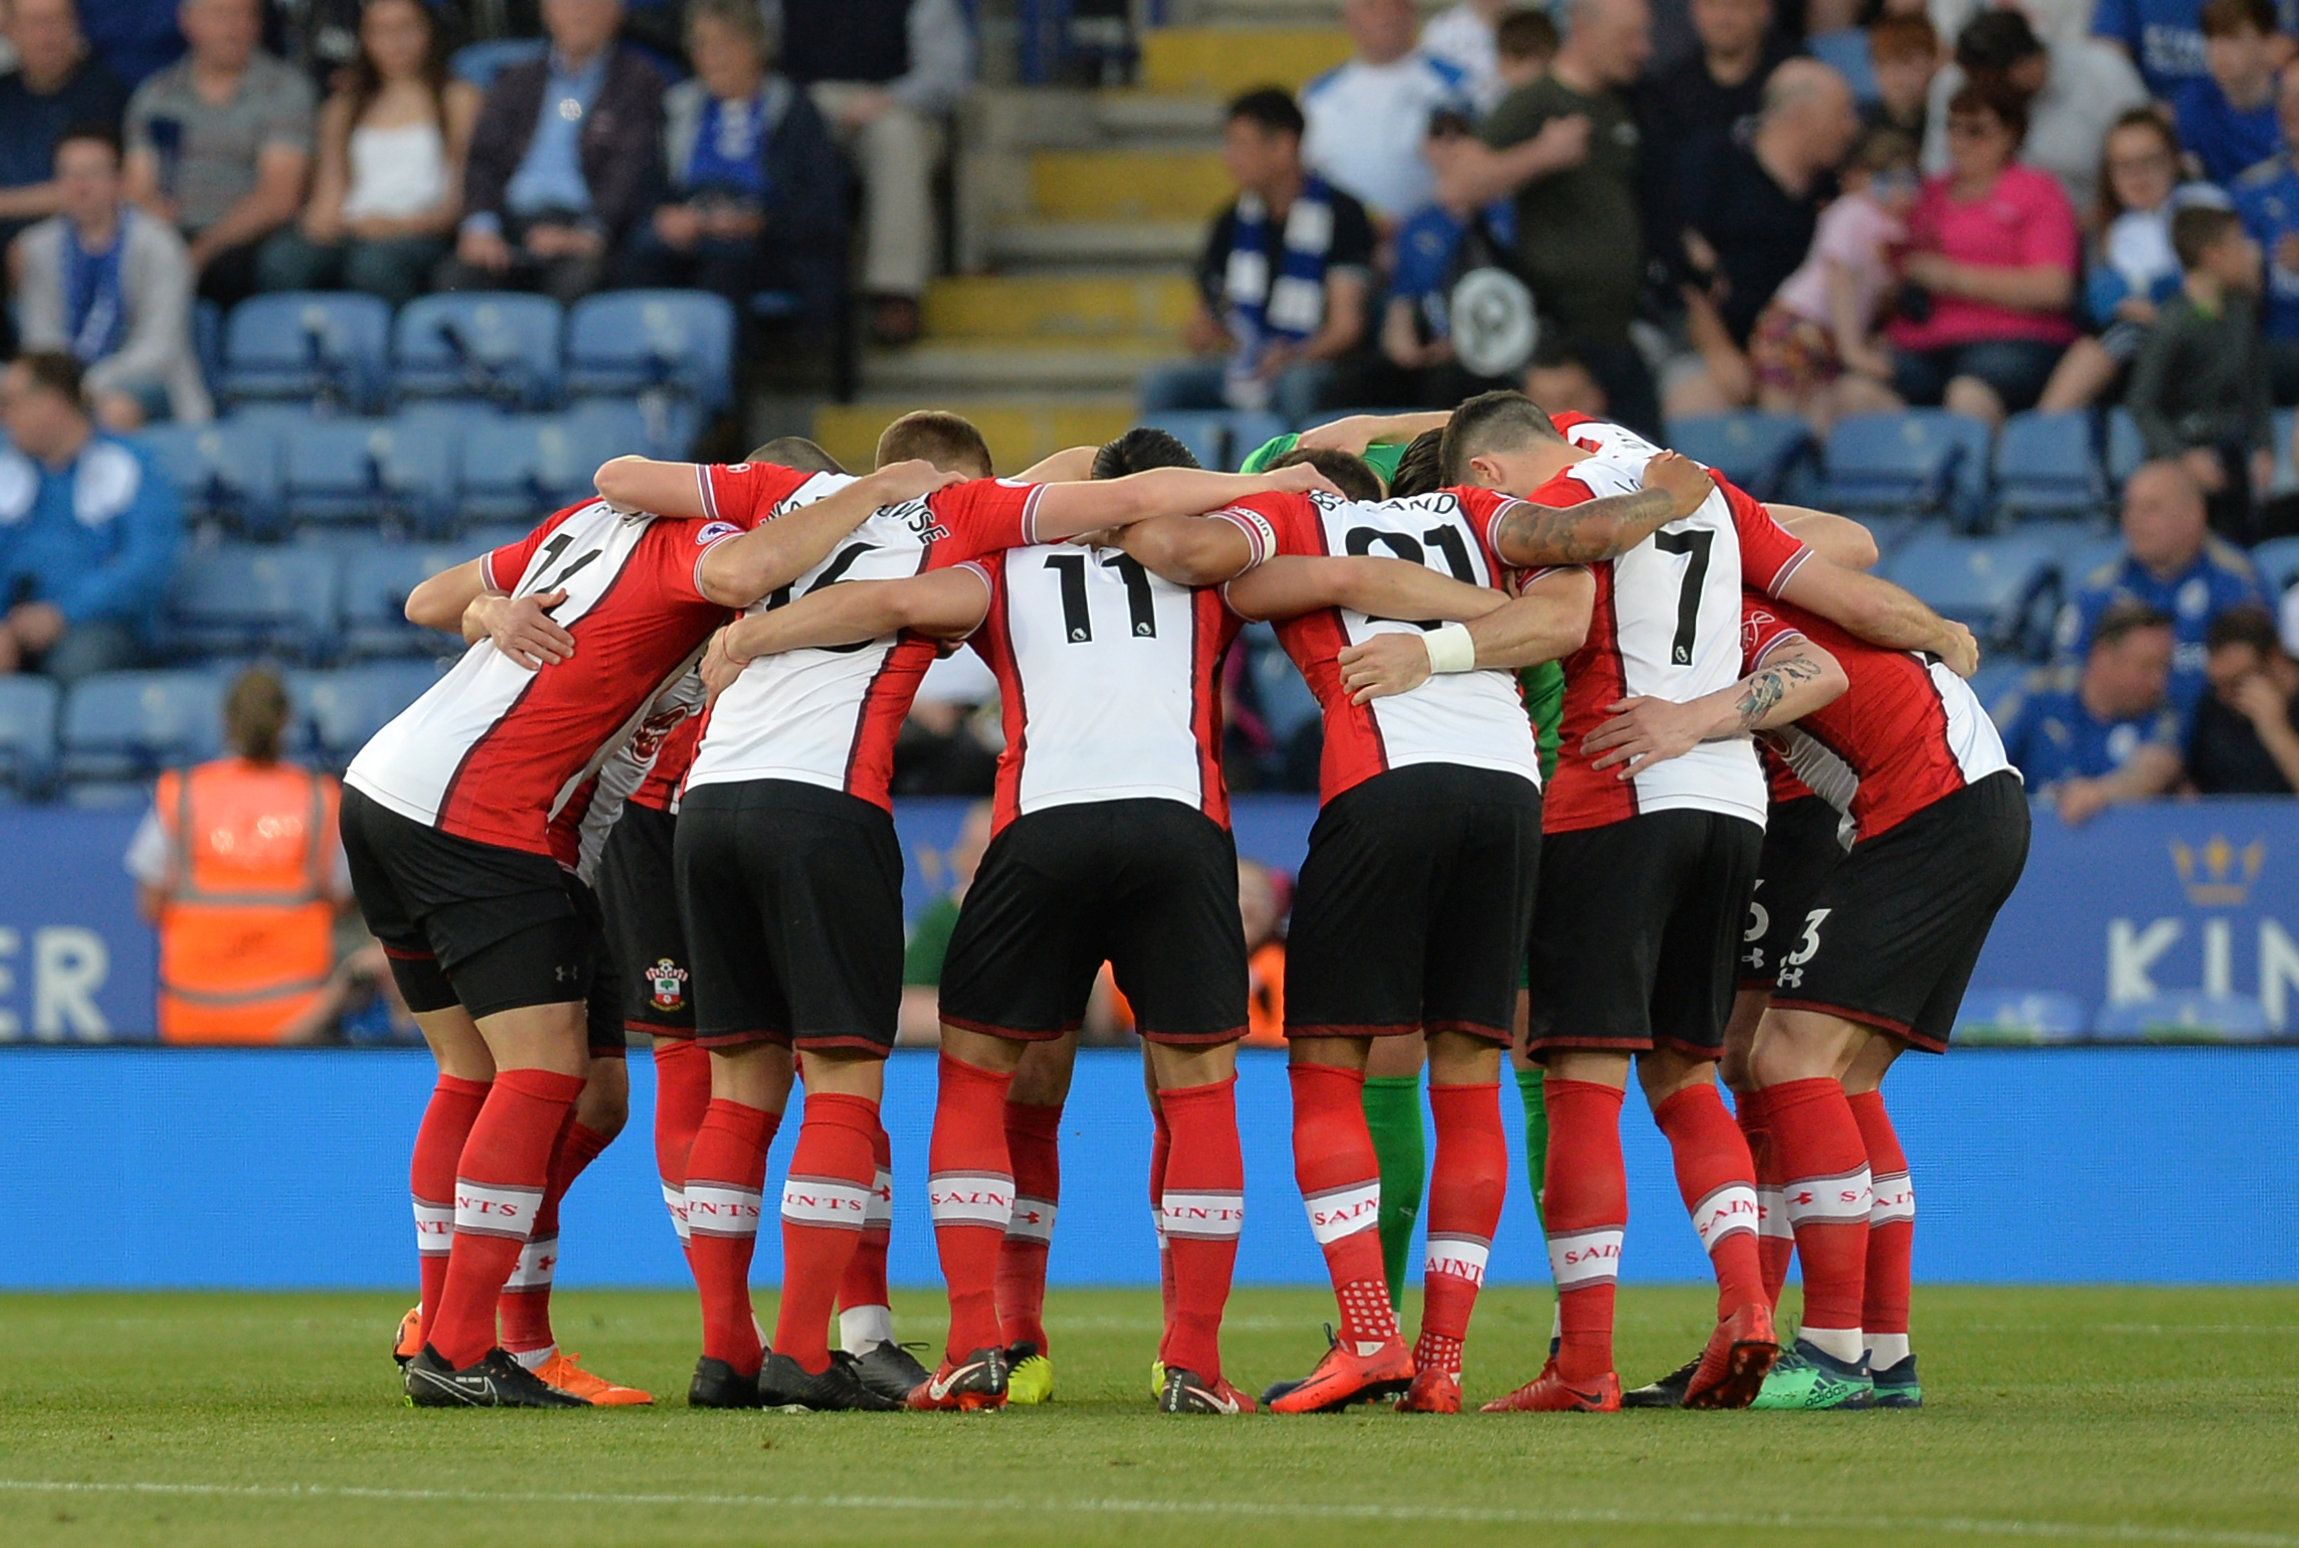 Soccer Football - Premier League - Leicester City vs Southampton - King Power Stadium, Leicester, Britain - April 19, 2018   Southampton team huddle before the match      REUTERS/Peter Powell    EDITORIAL USE ONLY. No use with unauthorized audio, video, data, fixture lists, club/league logos or "live" services. Online in-match use limited to 75 images, no video emulation. No use in betting, games or single club/league/player publications.  Please contact your account representative for further d